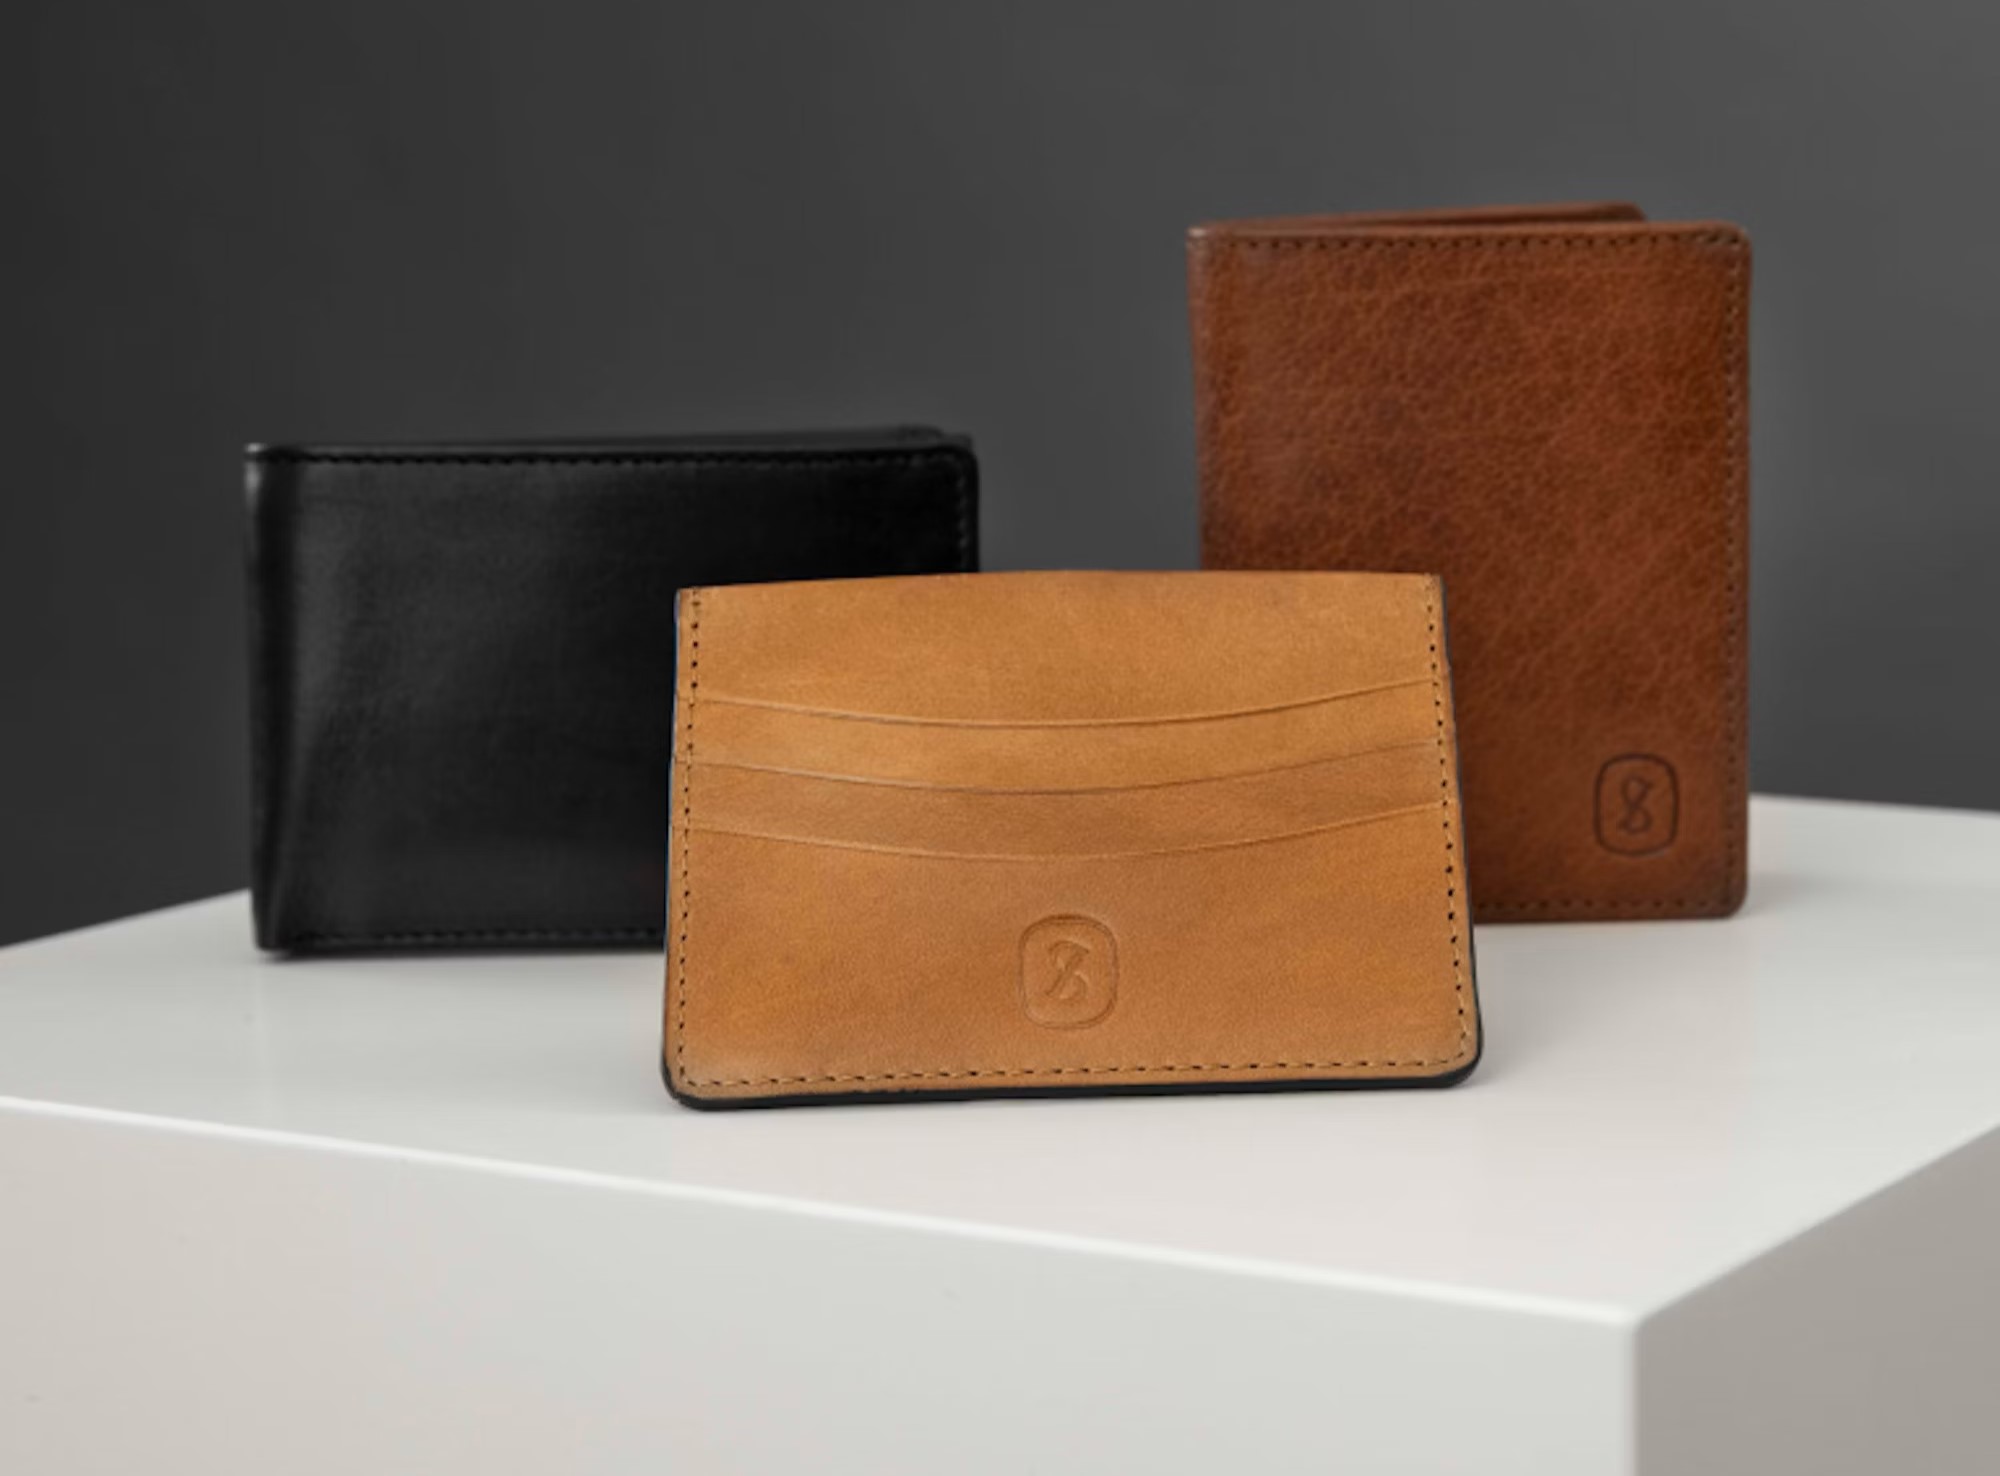 Review: Stylish Leather Wallet – A Must-Have Accessory